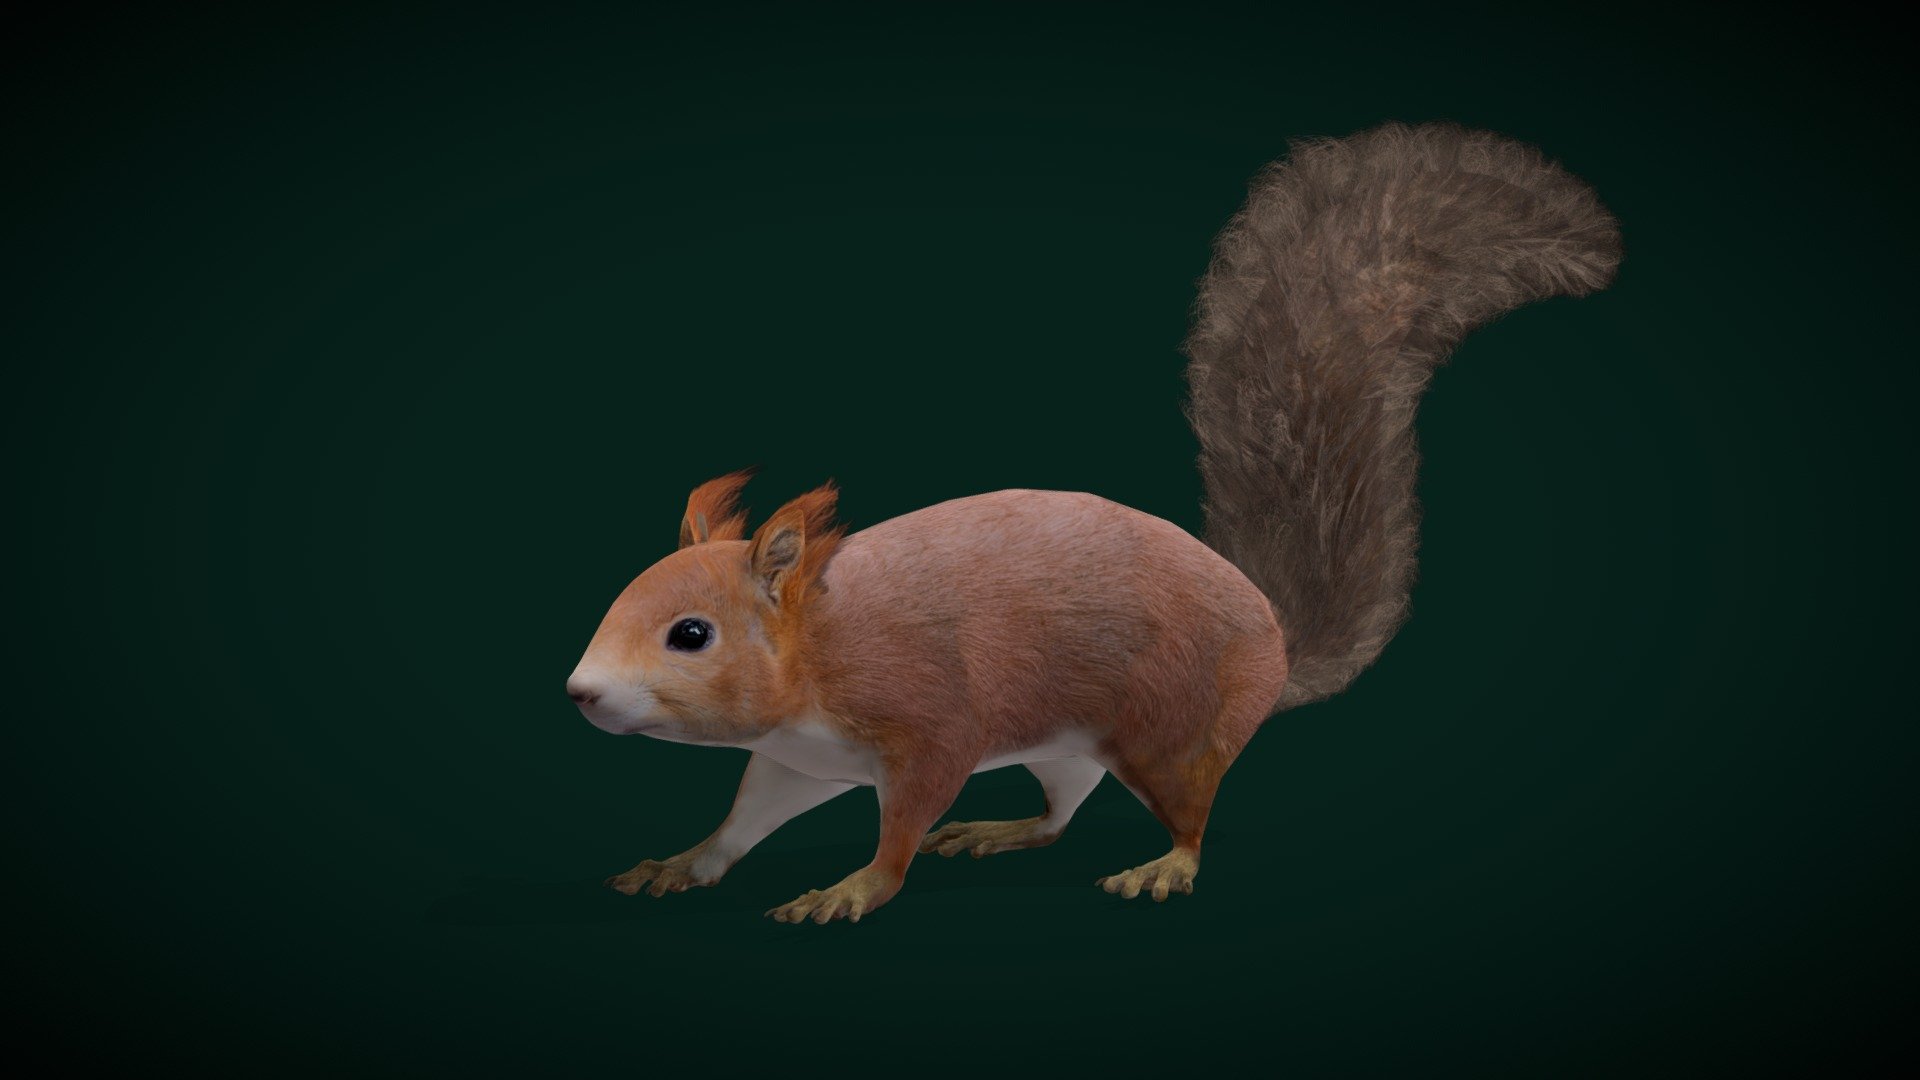 Eurasian red squirrel(Sciuridae)tree squirrel

Sciurus vulgaris Animal Rodents(Omnivorous)Pet,Cute

2 Draw Calls

LowPoly (without hair Card)

Game Ready (Asset)

Subdivision Surface Ready
*11 - Animations

4K PBR Textures Material

Unreal FBX (Unreal 4,5 Plus)

Unity FBX

Blend File 3.6.5 LTS

USDZ File (AR Ready). Real Scale Dimension (Xcode ,Reality Composer, Keynote Ready)

Textures Files

GLB File (Unreal 5.1 Plus Native Support)


Gltf File ( Spark AR, Lens Studio(SnapChat) , Effector(Tiktok) , Spline, Play Canvas,Omiverse ) Compatible




Triangles -19024



Faces -12751

Edges -25696


Vertices -11886




Diffuse, Metallic, Roughness , Normal Map ,Specular Map,AO



The red squirrel or Eurasian red squirrel is a species of tree squirrel in the genus Sciurus common throughout Europe and Asia. The red squirrel is an arboreal, primarily herbivorous rodent. In Great Britain, Ireland, and in Italy numbers have decreased drastically in recent years 3d model